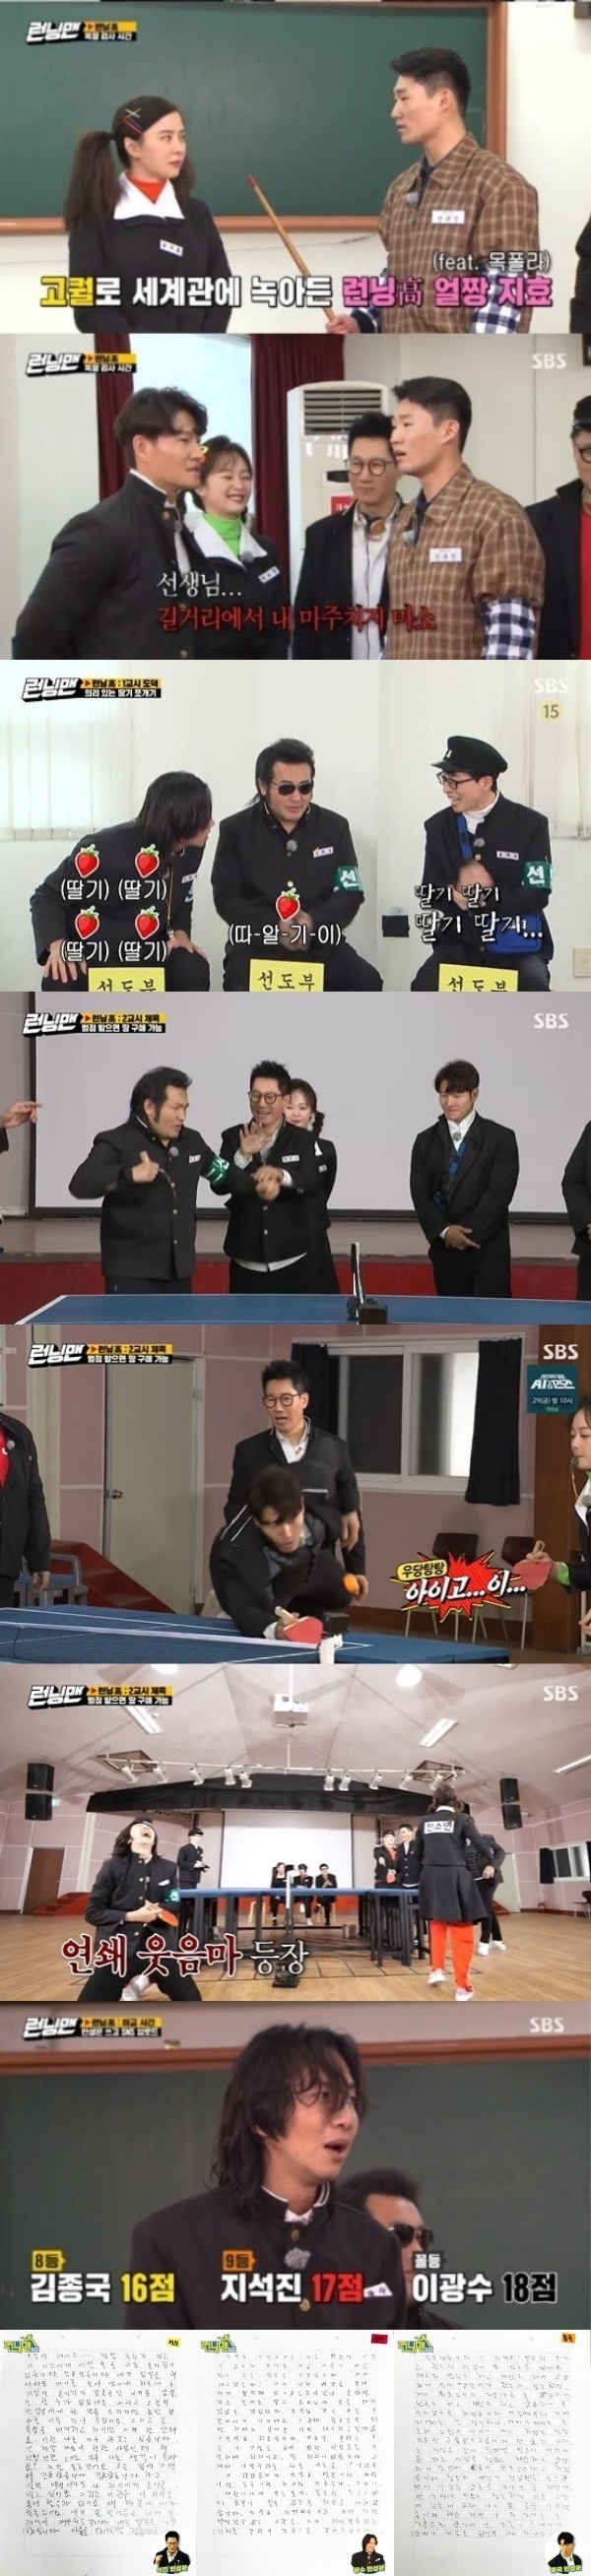 Running Man once again collected topics with Penal Letter of apologetic SNS upload.SBS Running Man, which was broadcasted on January 24th, recorded the first target of SBS, 2049 TV viewer ratings, 2.9% and 2.3% (Nilsen Korea metropolitan area, household standard), respectively.Top TV viewer ratings per minute jumped to 7.3 per cent.On this day, Race was decorated with the Burning 18 Again Race, which members divided into high school students in the 80s, and actors Kim Bo-sung and Defconn were invited as guests.Haha X Song Ji-hyo X Yang Se-chan was a band, Kim Jong-kook X Ji Suk-jin X Jeon So-min X Defconn was a dance department, and Yoo Jae-Suk X Lee Kwang-soo X Kim Bo-sung was transformed into a leading part and laughed from visuals.In Race, where the comedian Shin Jin appeared as a student teacher, the game of strawberry split upgrade was revealed and attracted attention.However, Kim Bo-sung was a Game Black Hole with a serious hole strength, and even moreover, Yoo Jae-Suk, who was a Kim Bo-sung, laughed because he could not pass his turn.In the end, Kim Bo-sung laughed at the team kilo game, which called the leading team.In the next race Tripital Expansion Table Tennis, the members became useless and serious, making the scene furious.In particular, the confrontation between the three leading members and the band soared to 7.3% of the highest TV viewer ratings per minute, and Defconn was angry that he could not catch the racket because of the members who became serious when he entered the game.Bae Hyo-ju on the news